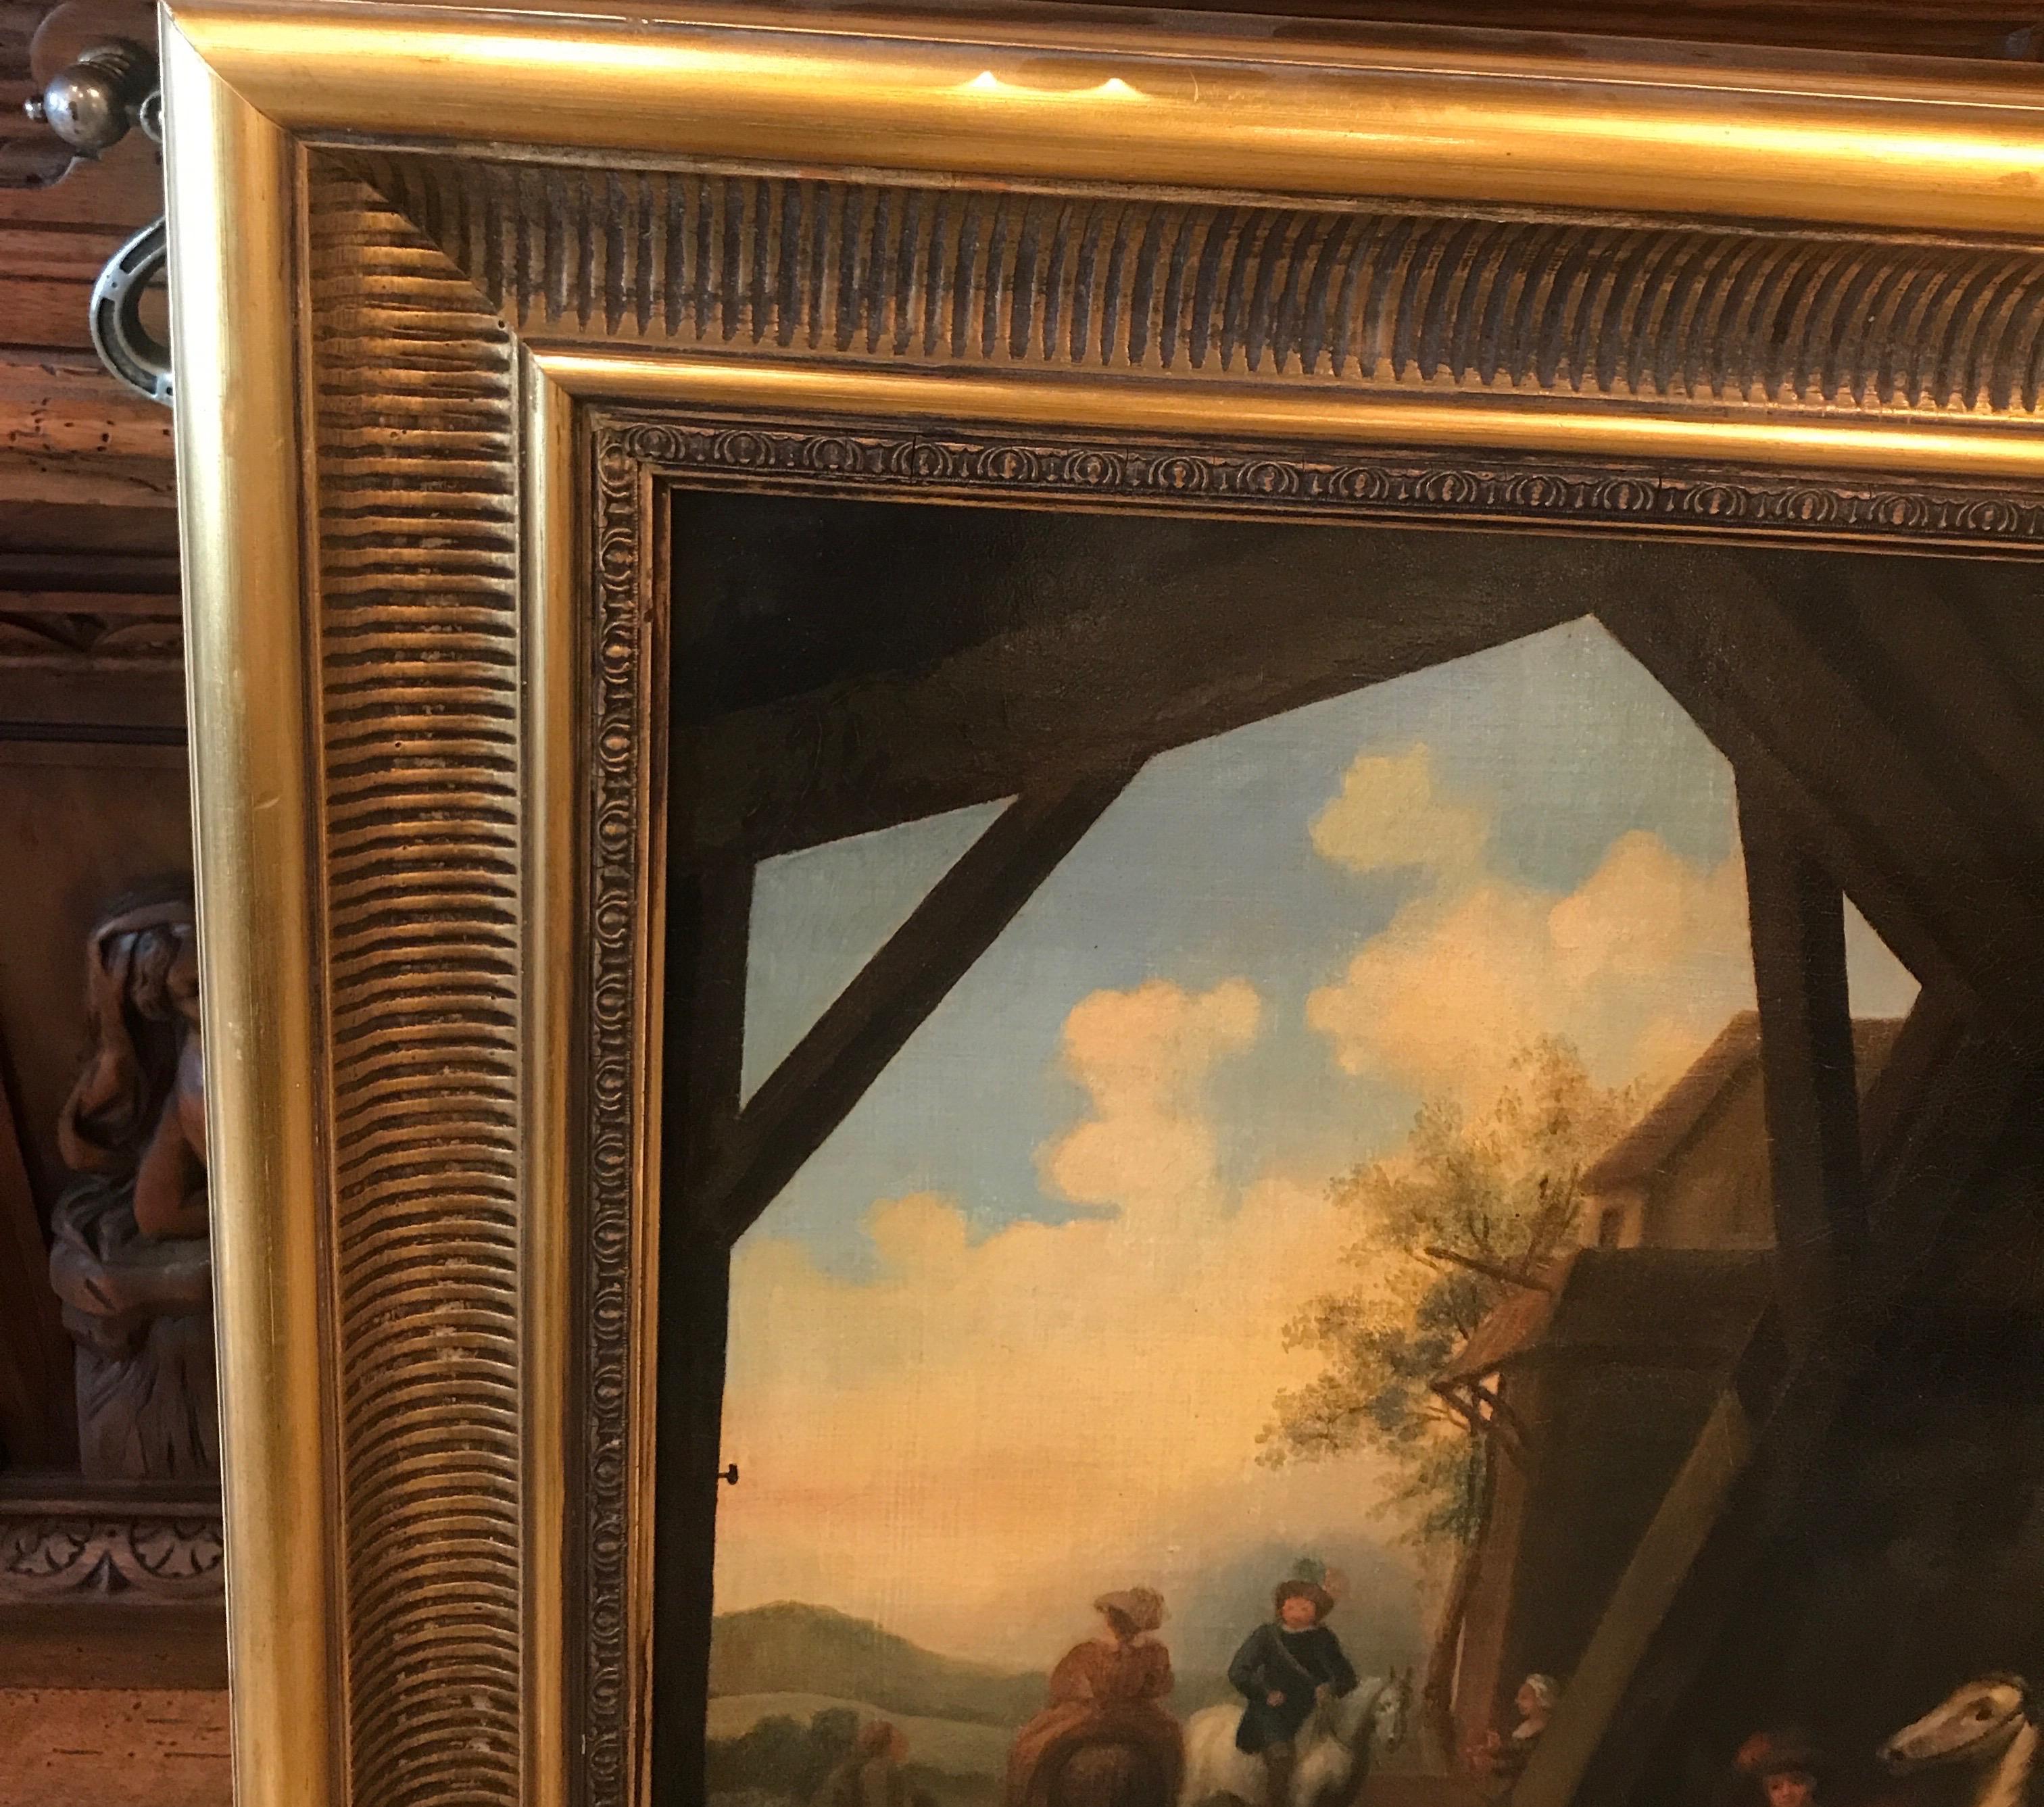 Beautifully painted Dutch painting with a later giltwood frame. The painting showing people, horses and a dog with a barn interior surrounding. The frame is later but about 100 years old. 30 by 24 framed, 24 by 18 unframed.